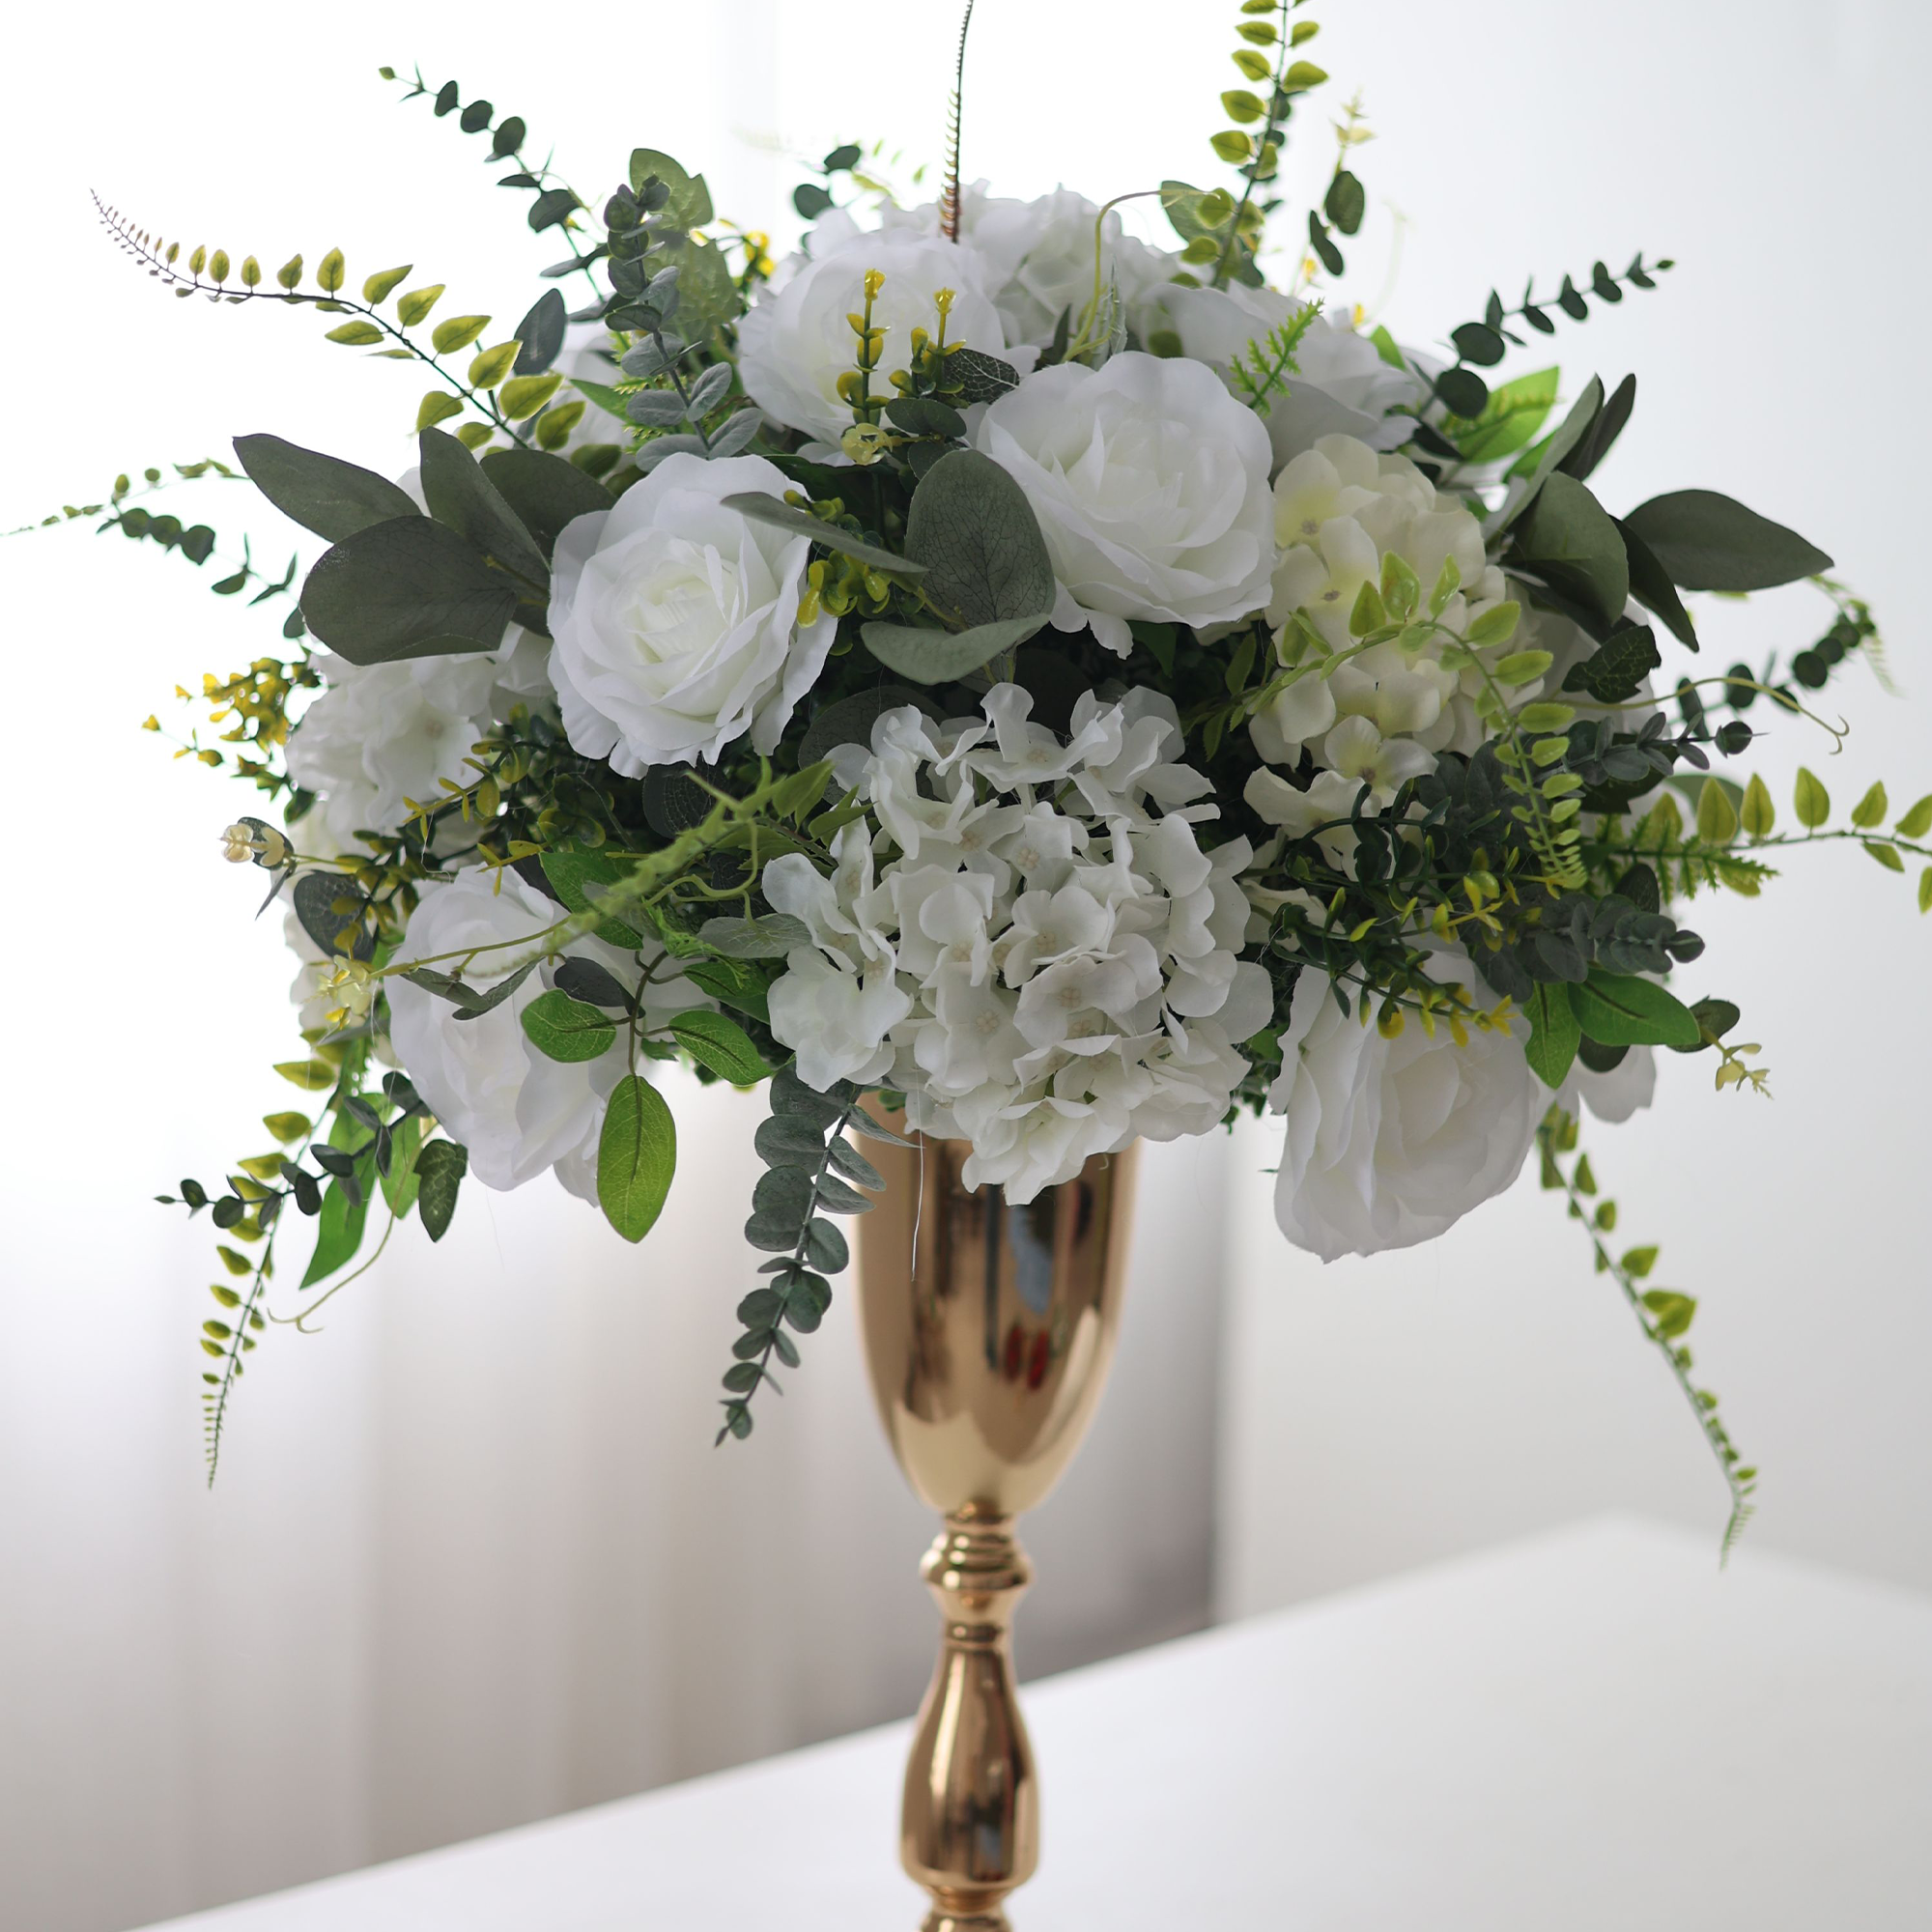 Luxurious Blossom Bouquet featuring premium red and white roses with lush greenery accents VF-0089